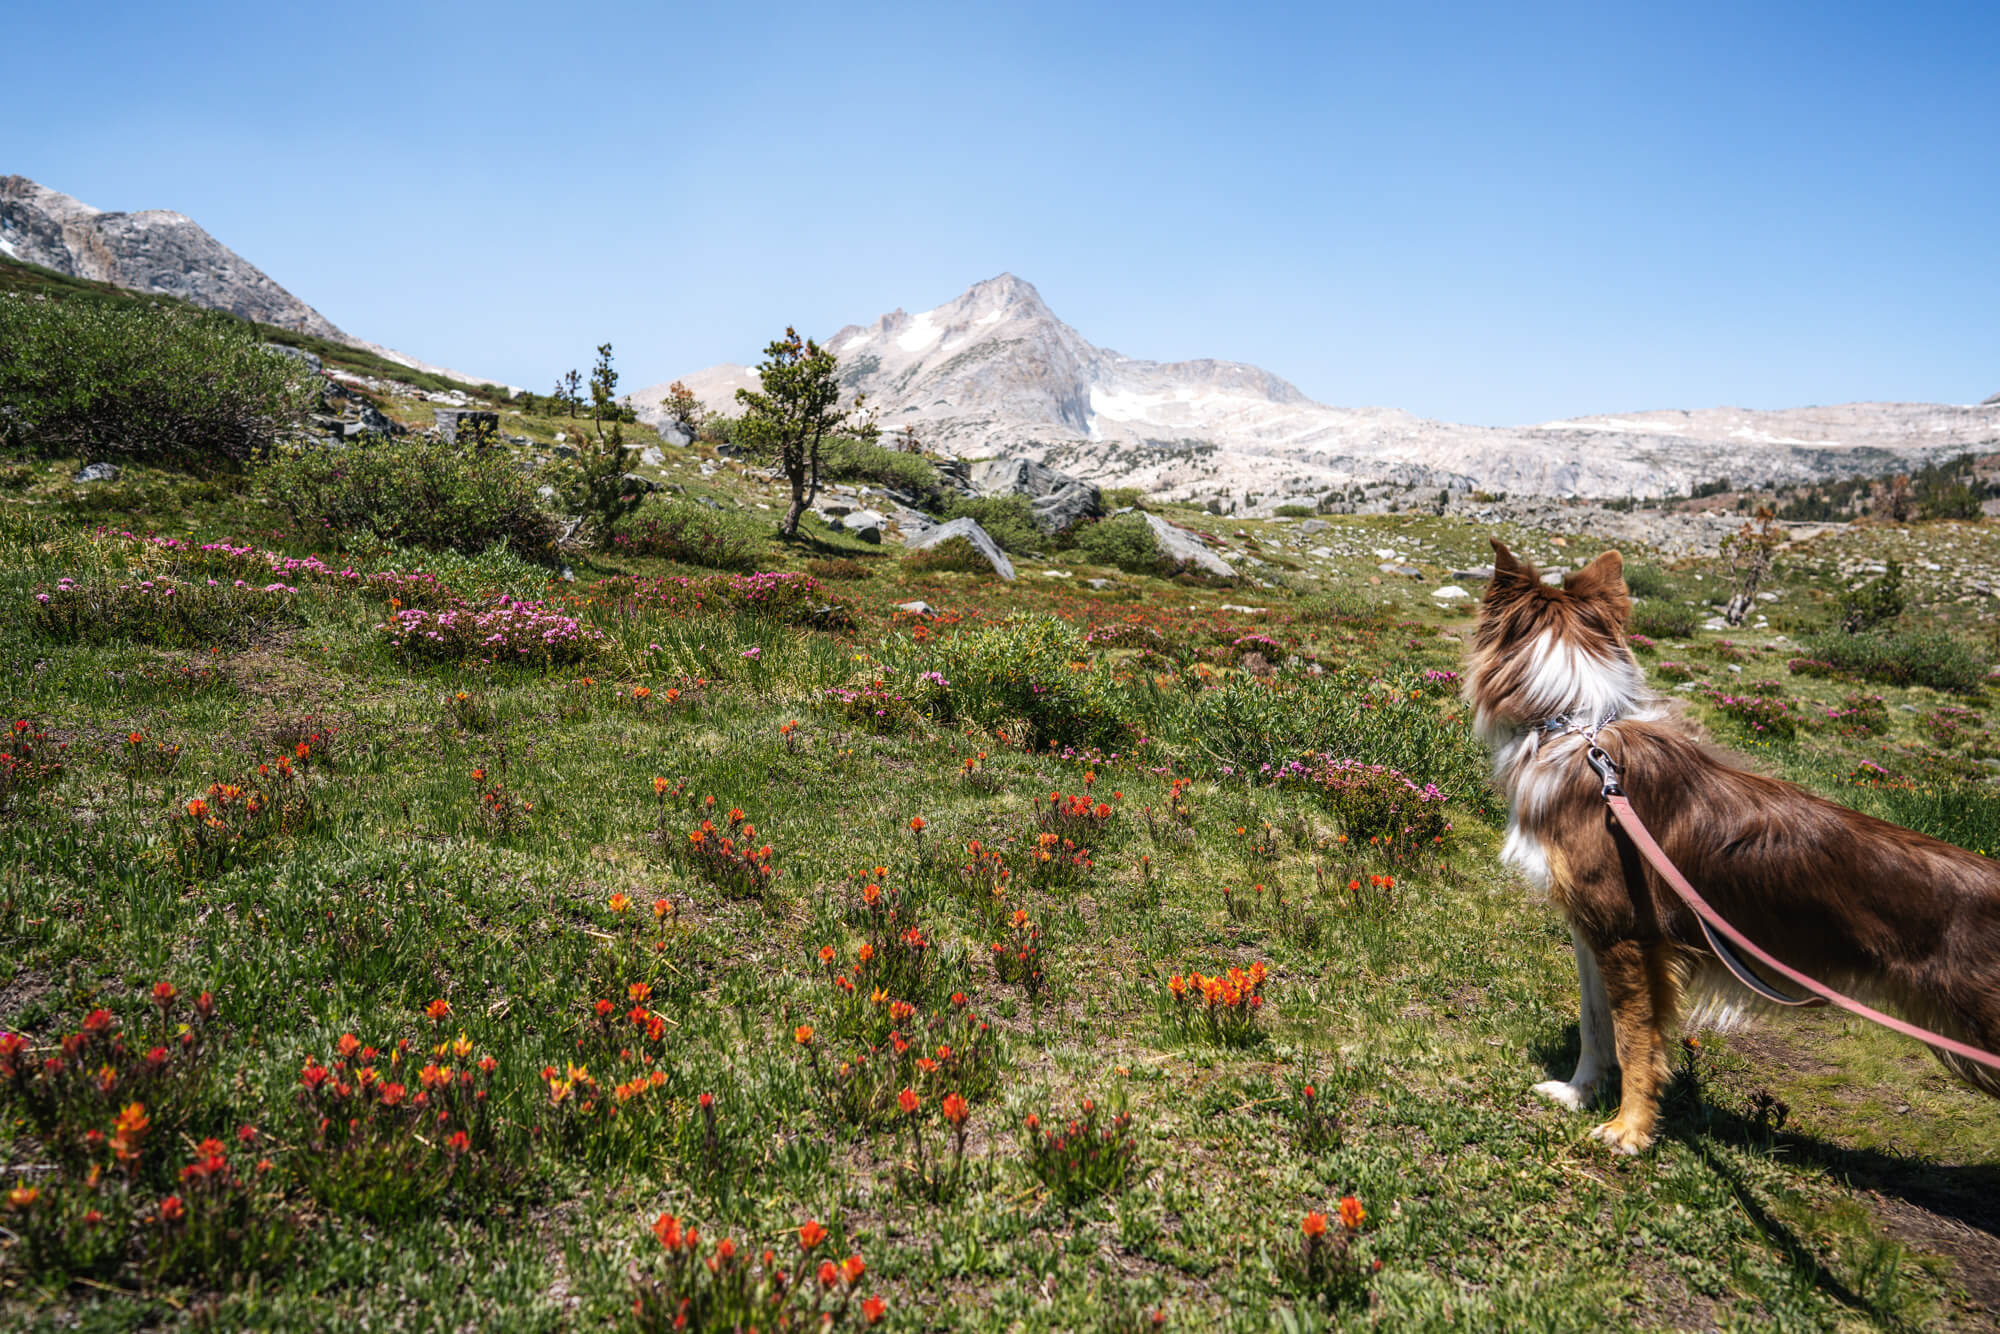 Our dog River admiring the wildflowers in Twenty Lakes Basin